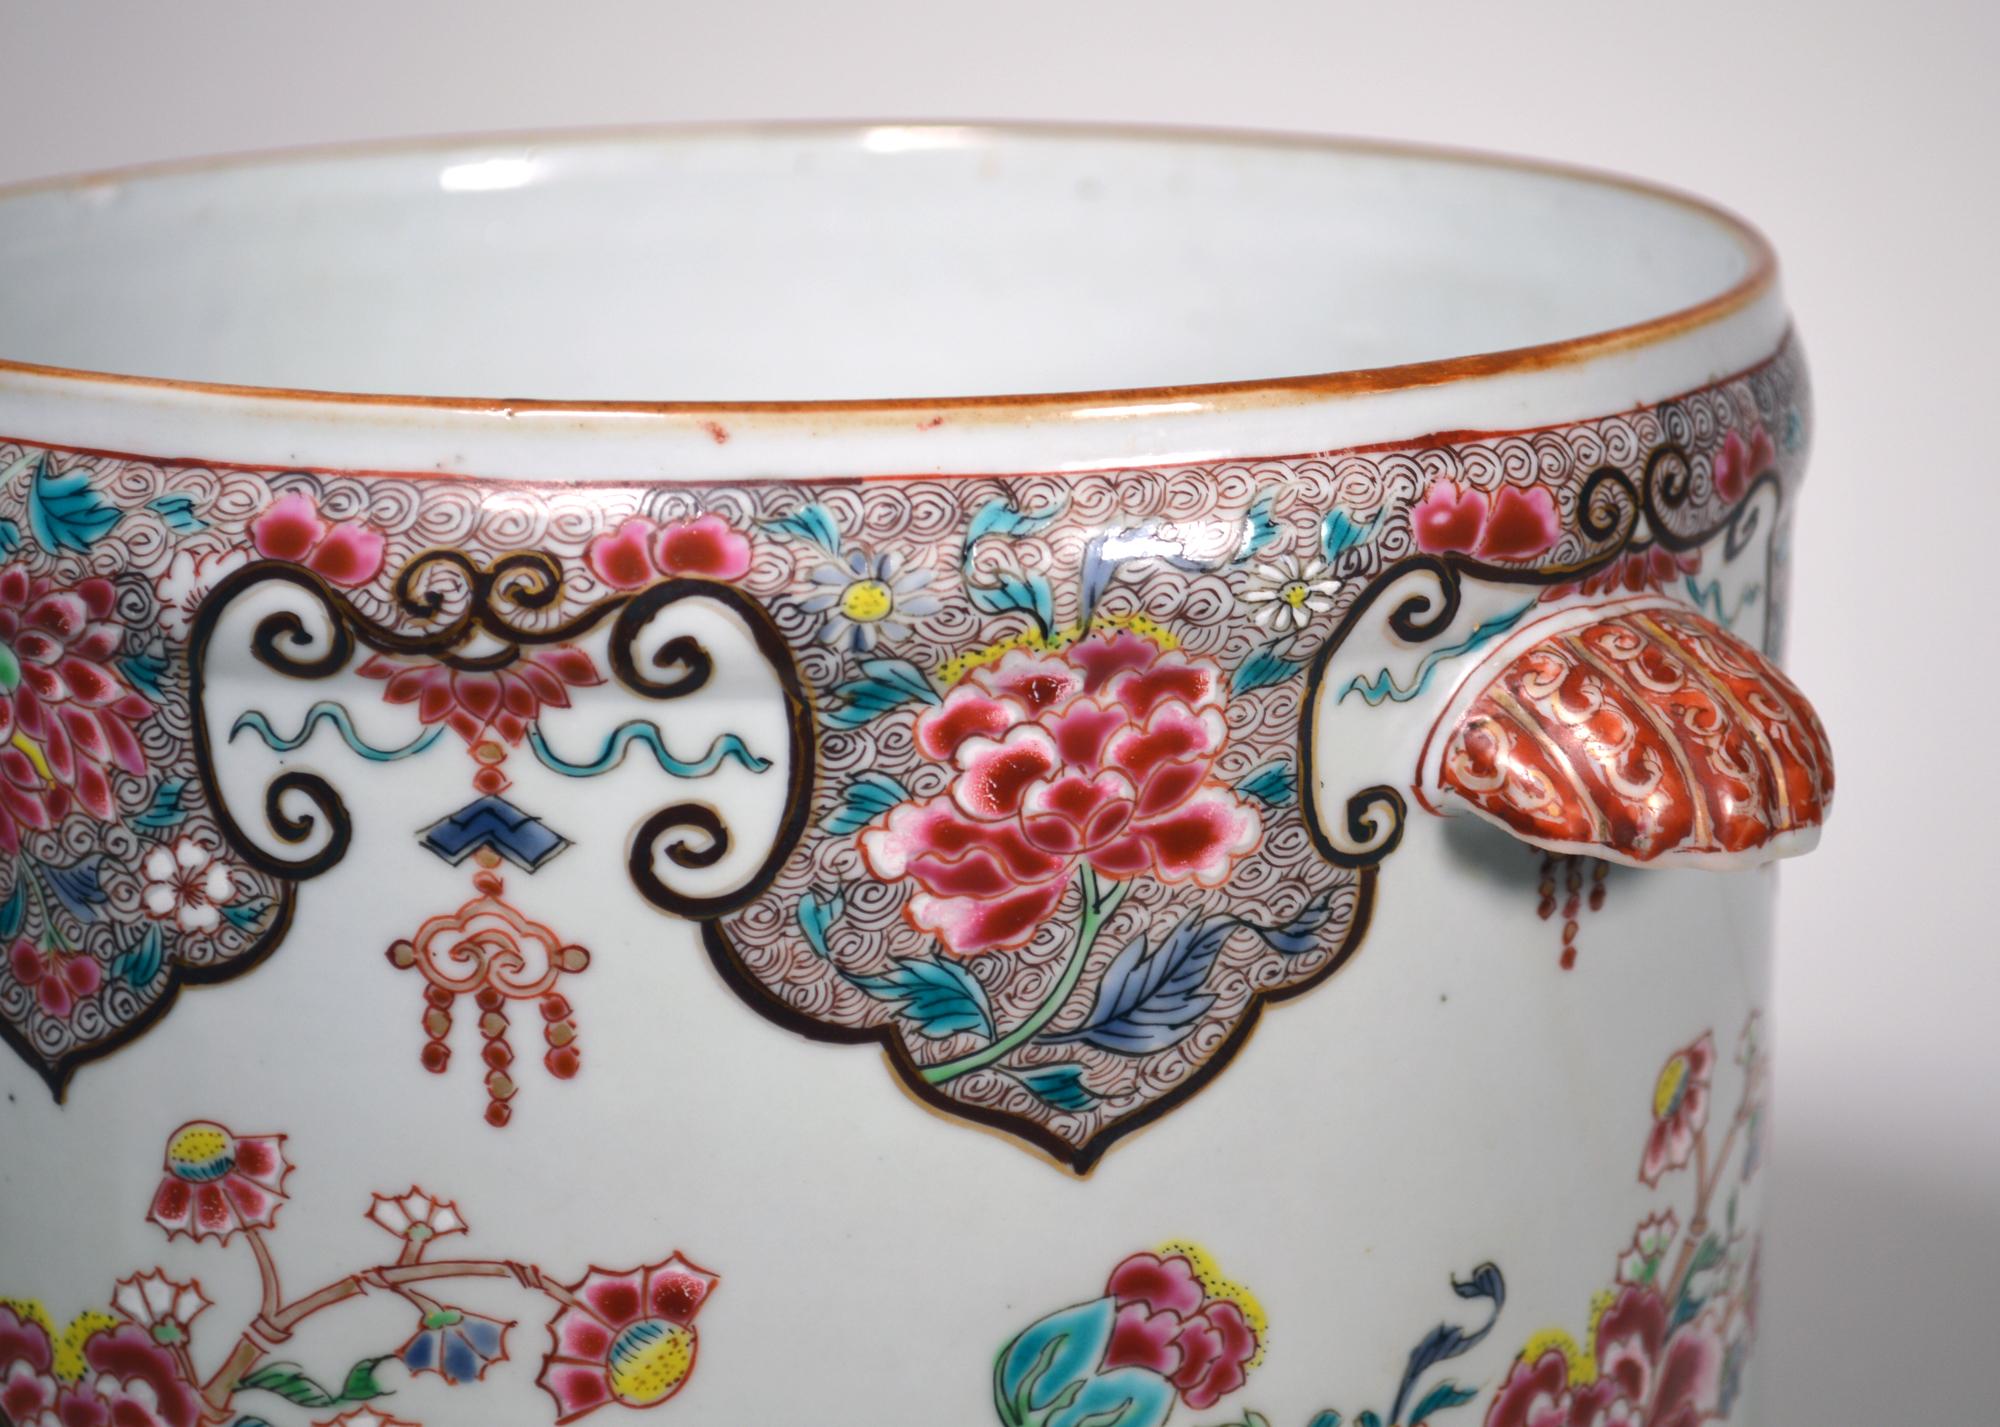 18th-century Chinese Export Porcelain Large Famille Rose Cachepot For Sale 2